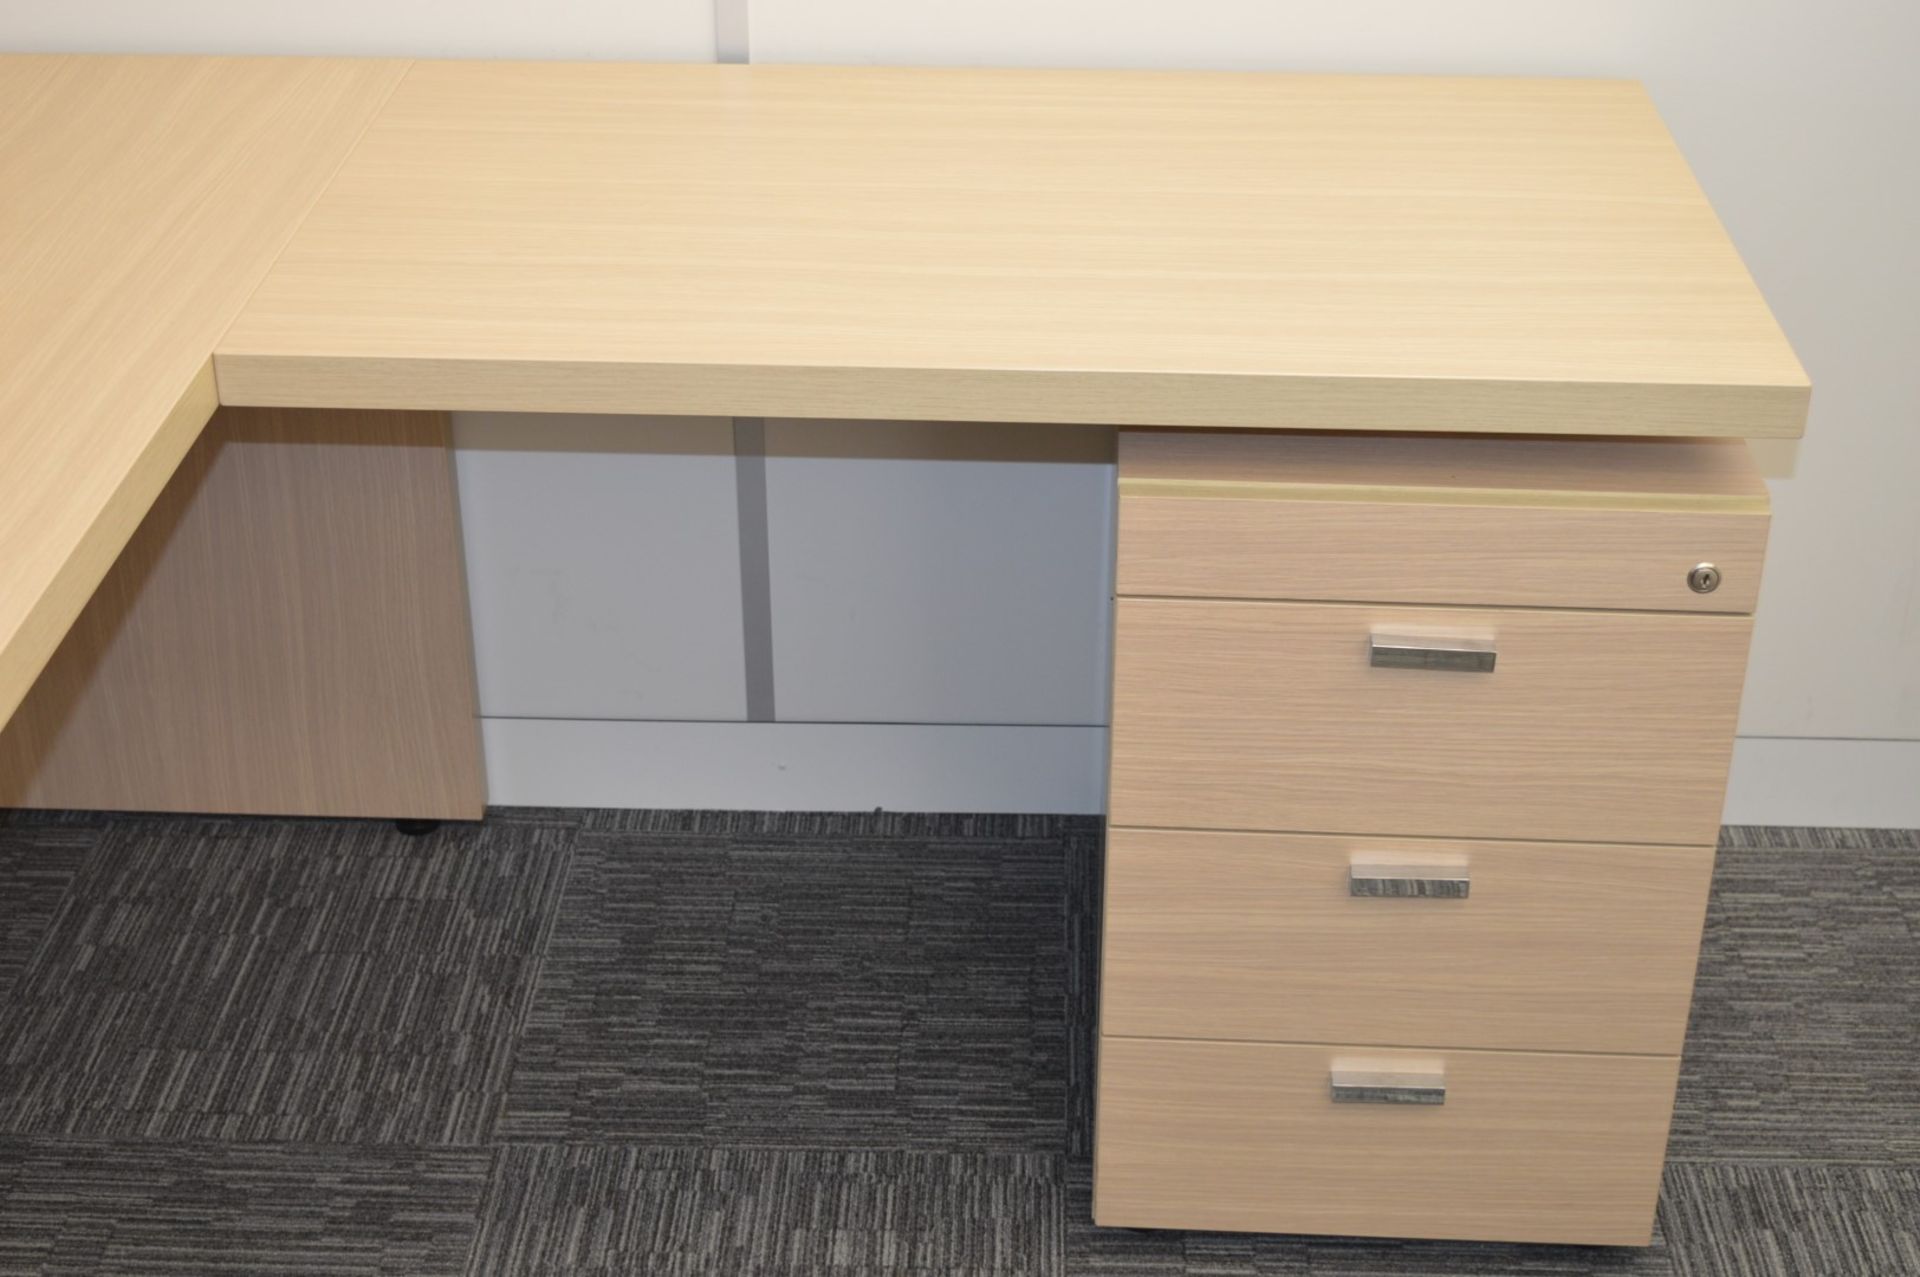 1 x Babini Executives Office Desk With Three Drawer Pedestal and Side Table - Attractive Finish With - Image 6 of 9